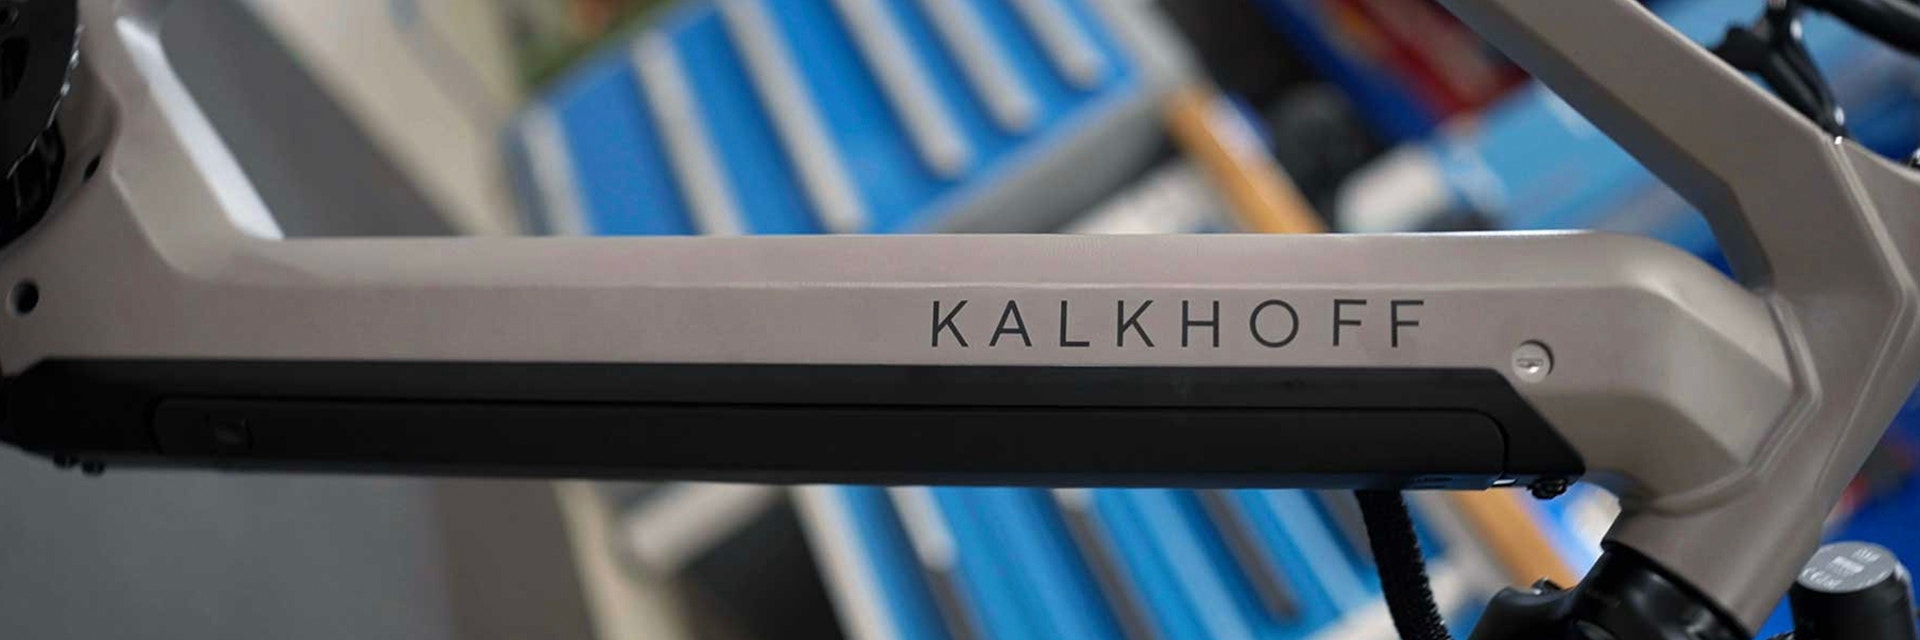 Metal 3D-printed bike frame with the name Kalkhoff on it